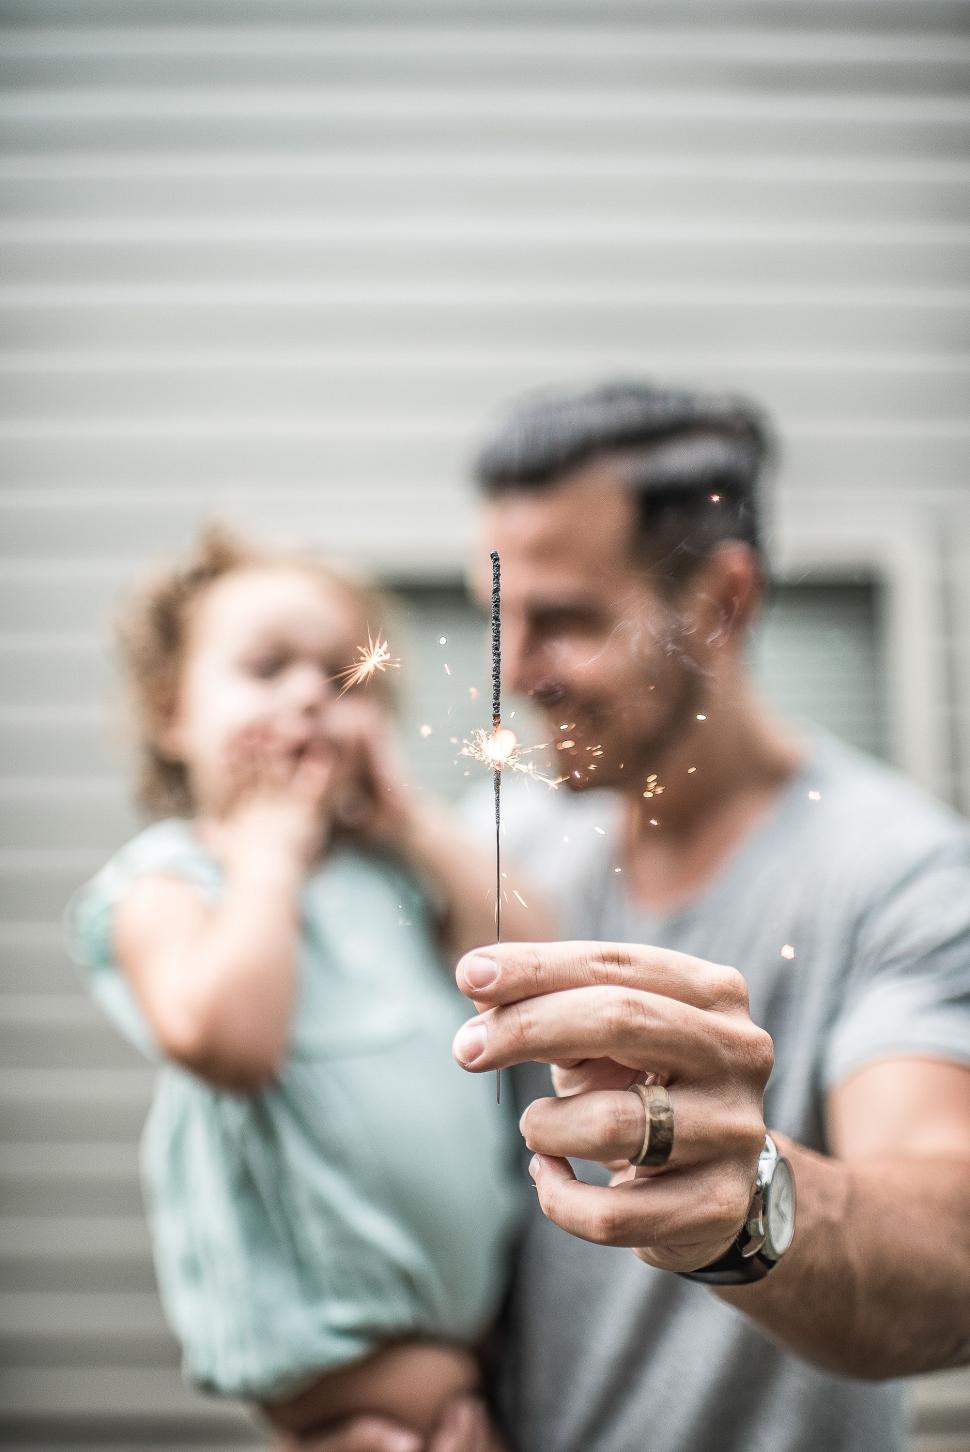 Free Image of Man and Woman Holding Sparkler 